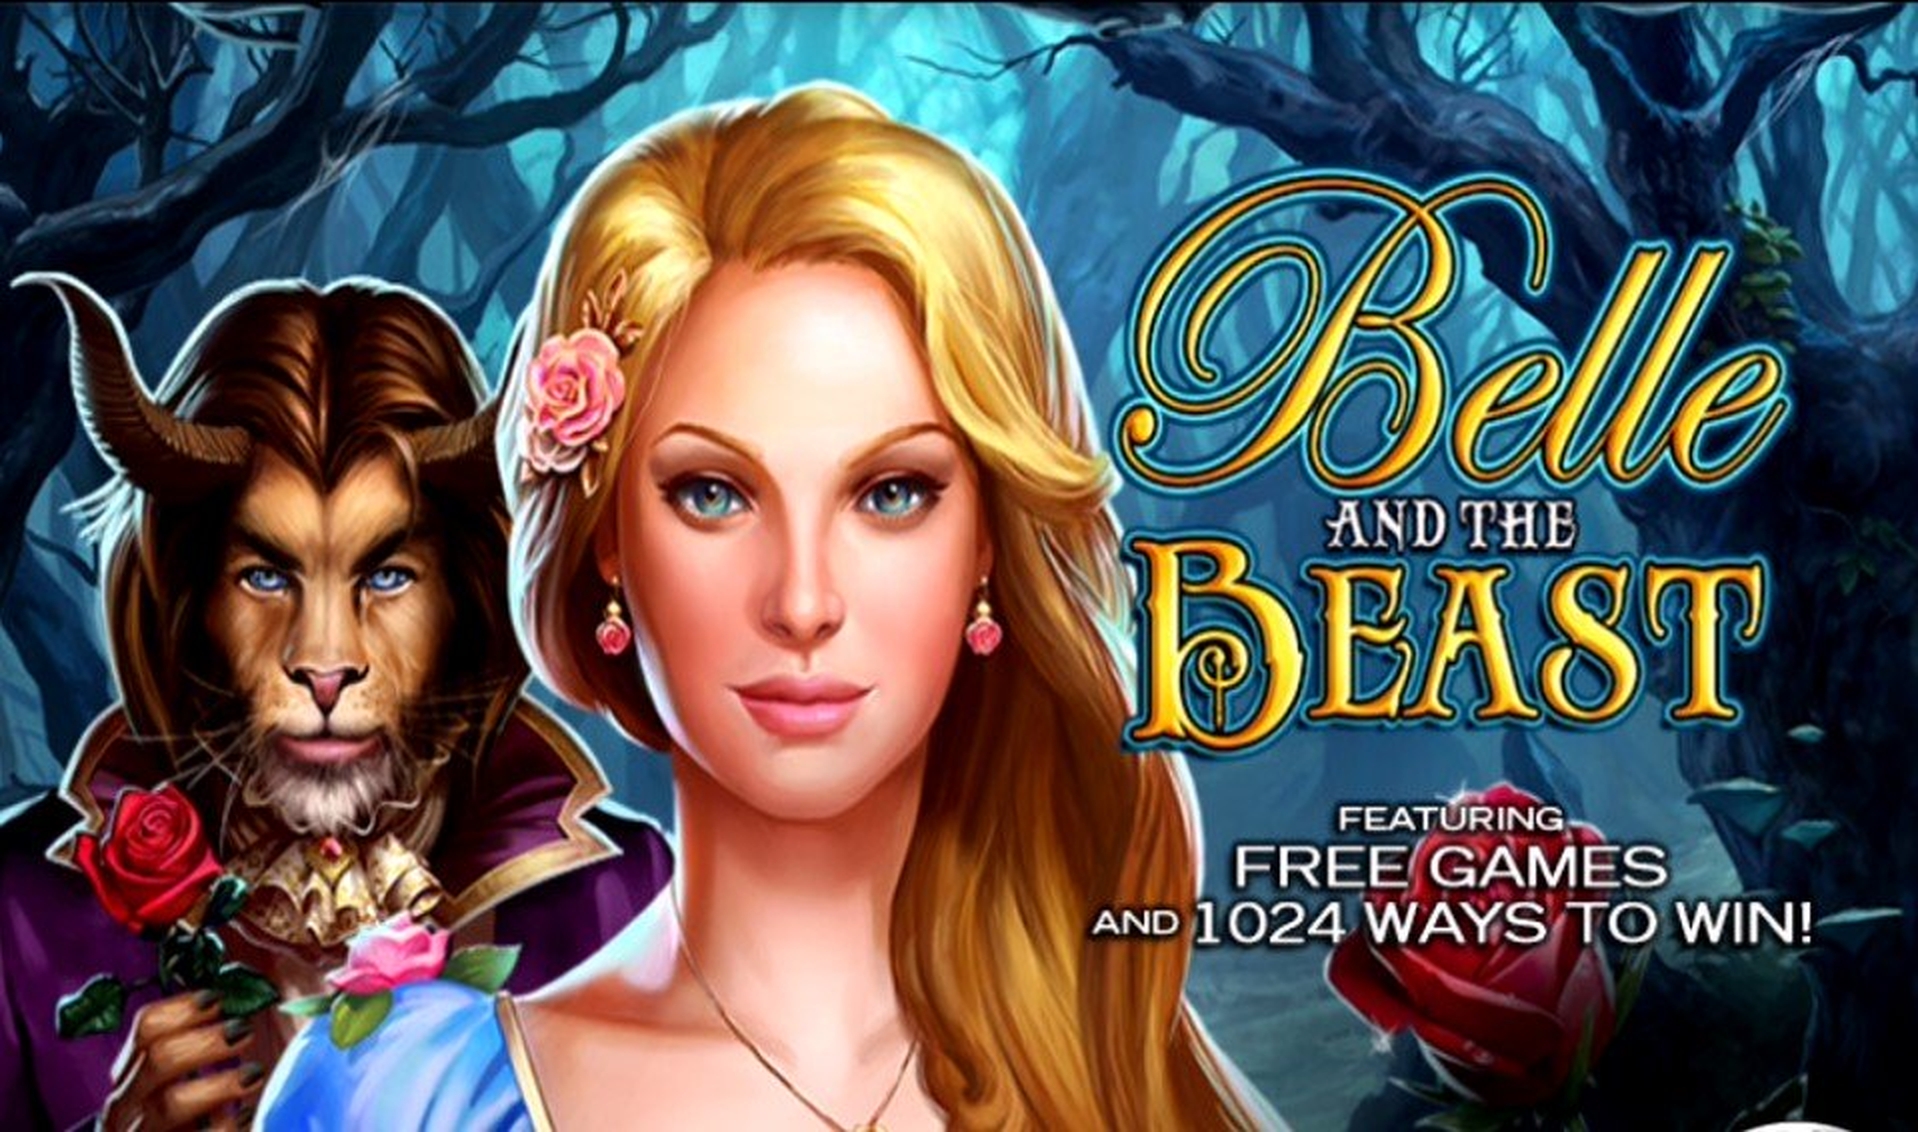 The Belle and the Beast Online Slot Demo Game by High 5 Games